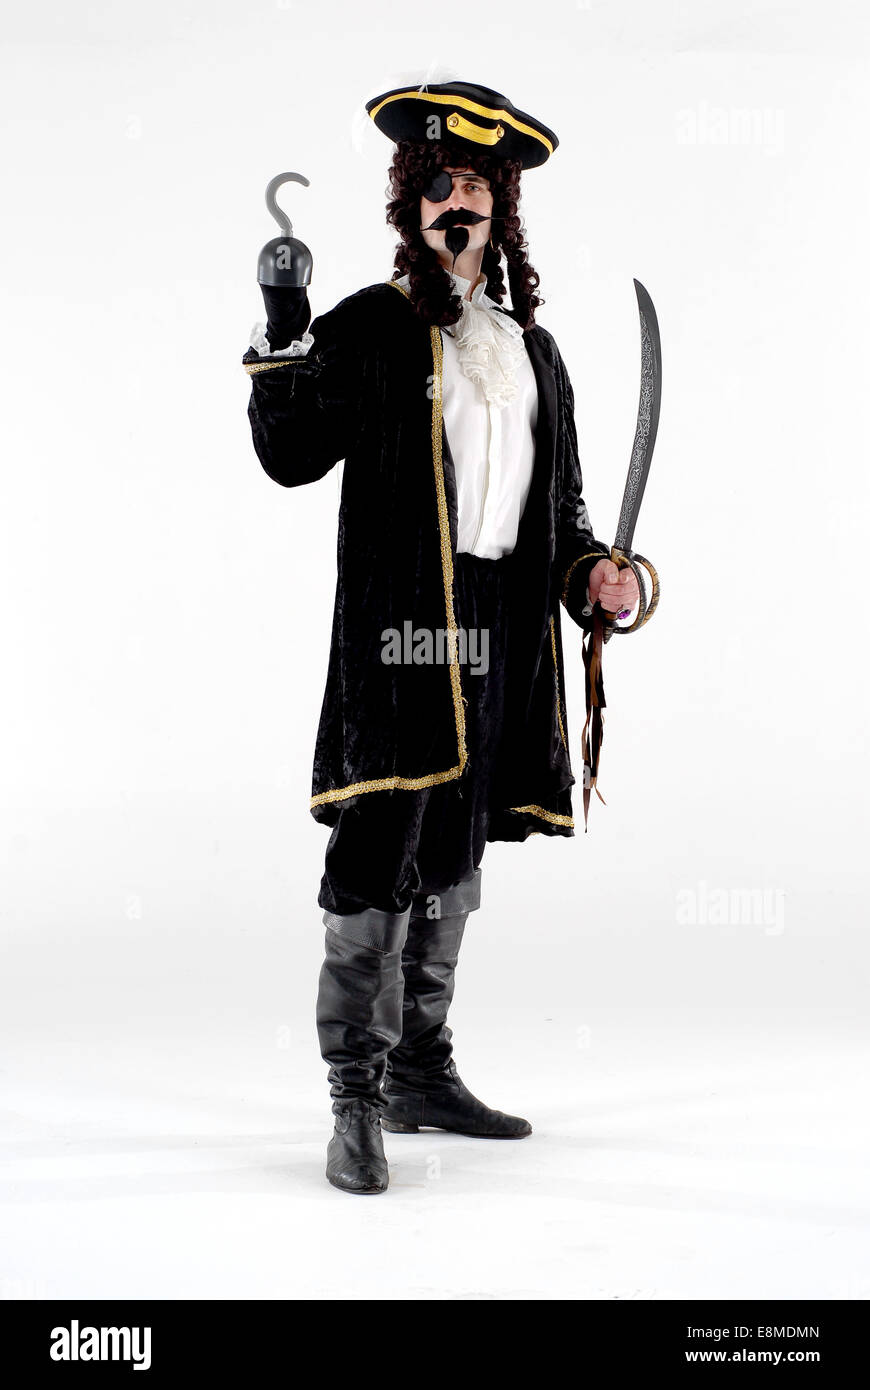 Man dressed in fancy dress comedy costume as captain hook the pirate character from peter pan against a white background, Stock Photo